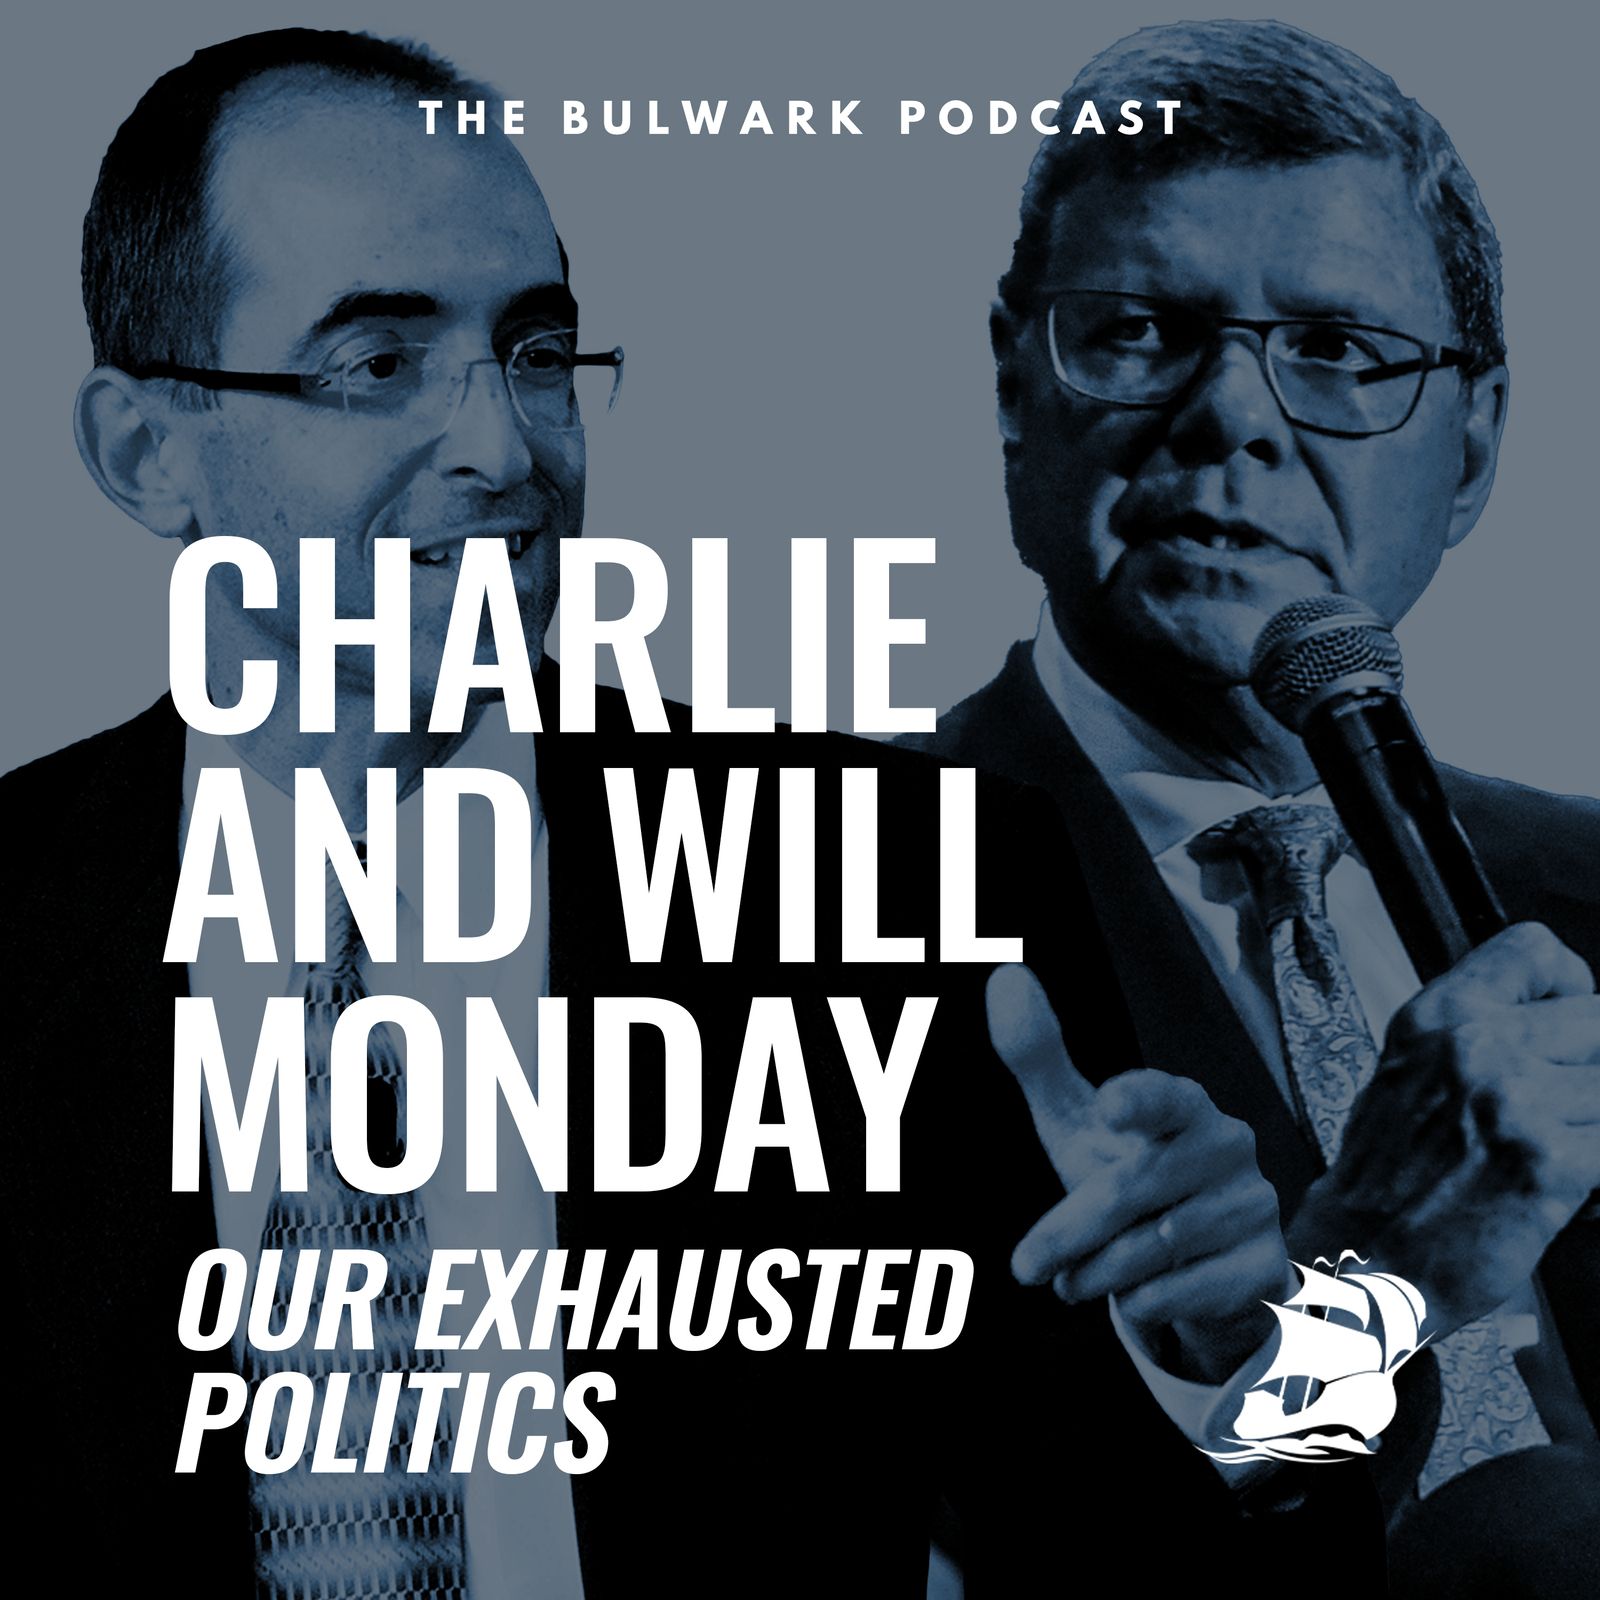 Our Exhausted Politics by The Bulwark Podcast